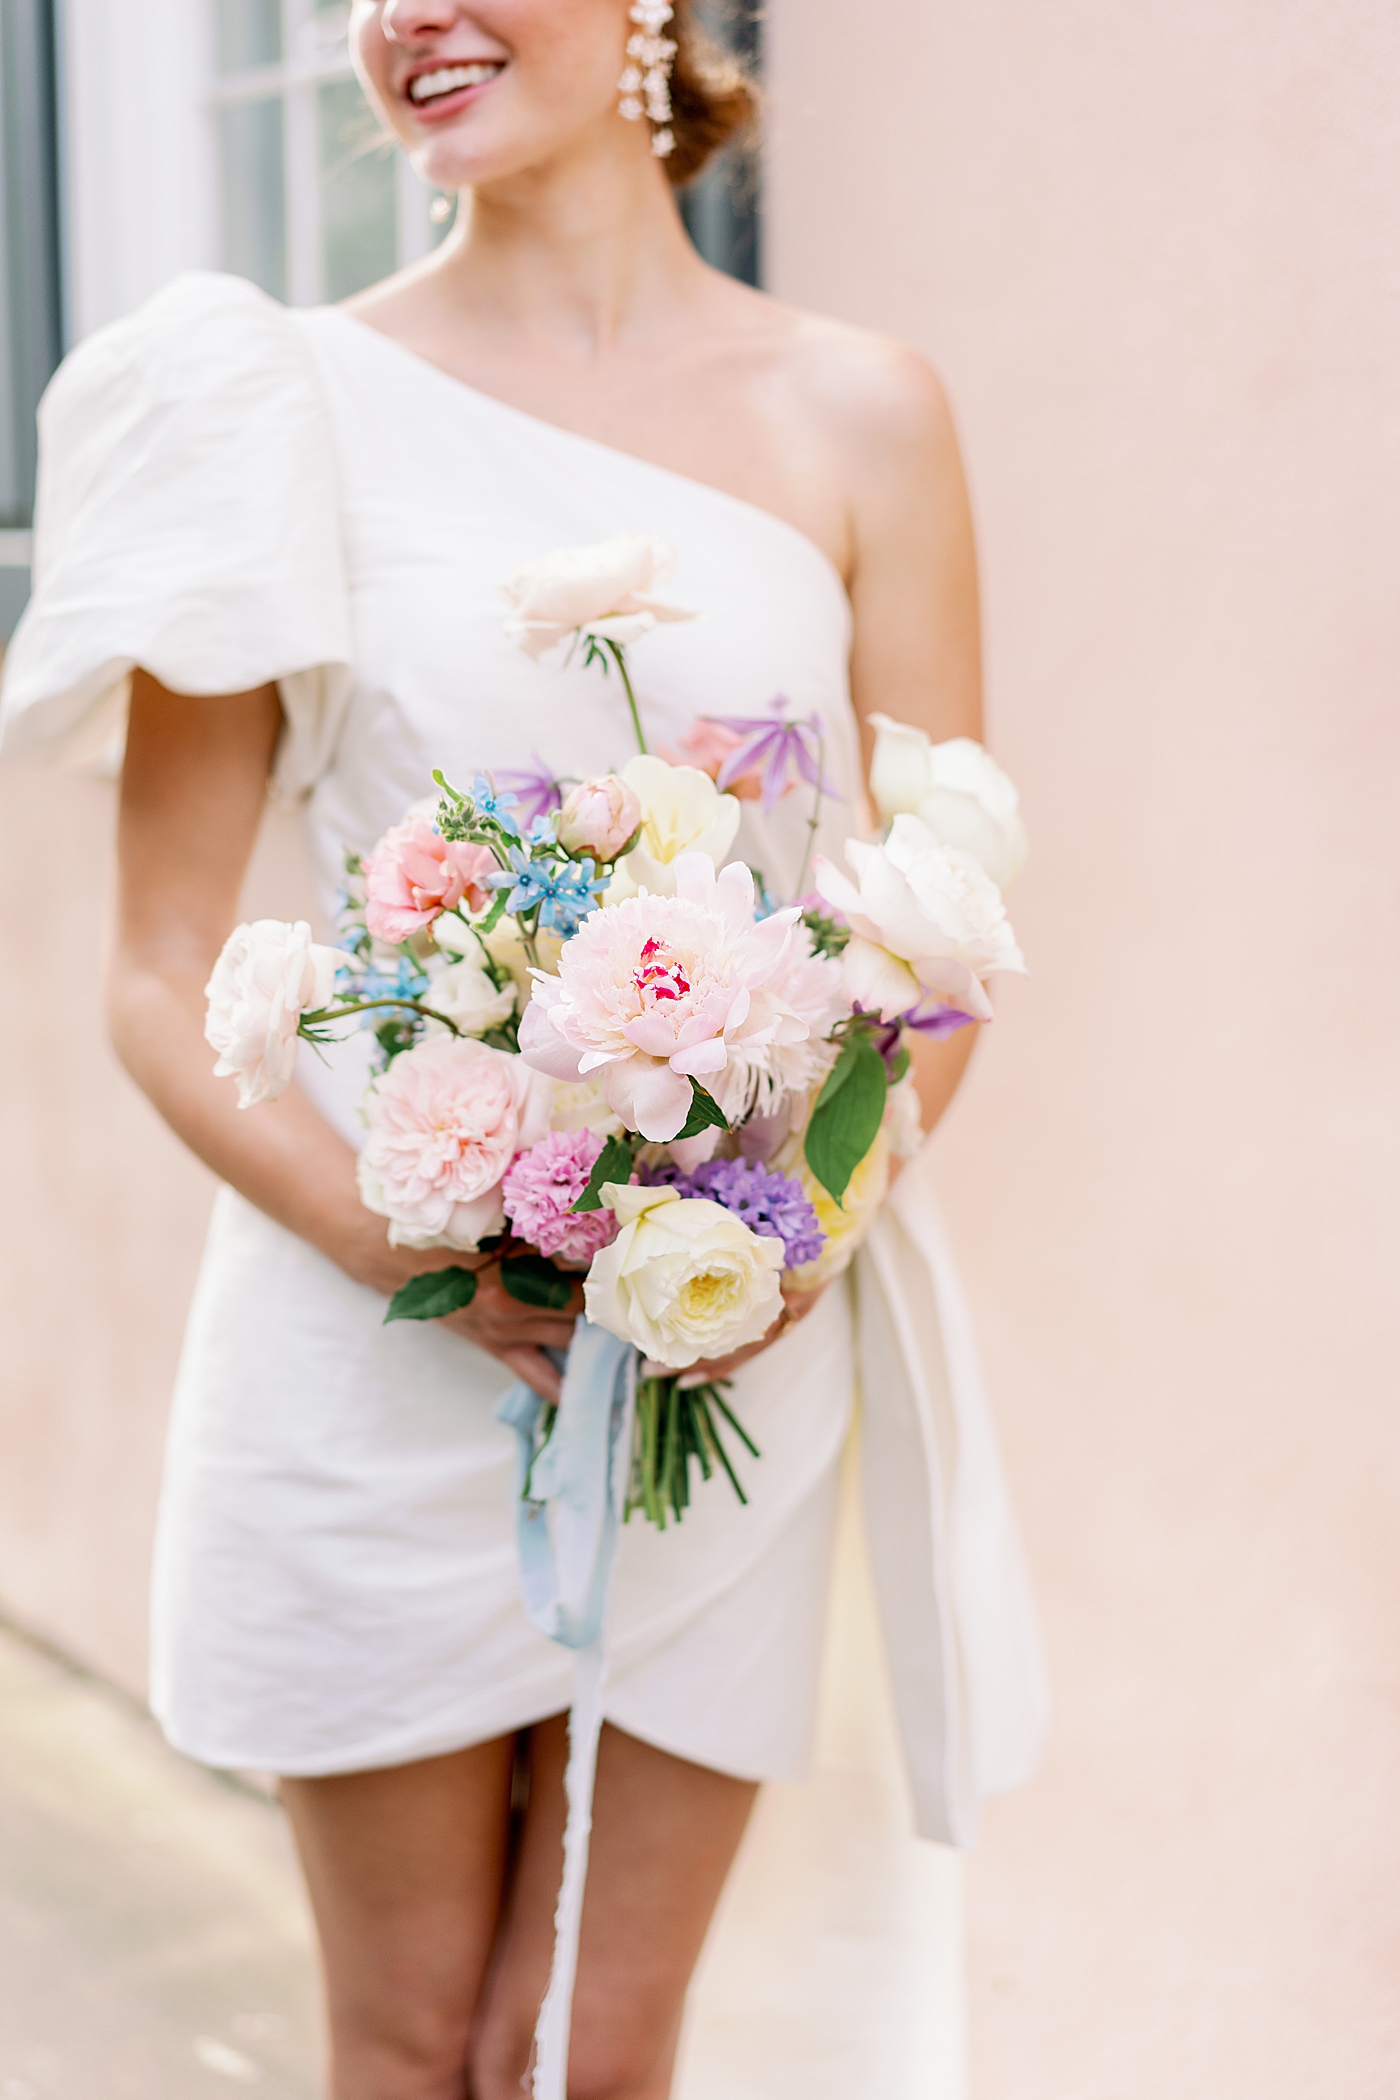 Detail of bride holding a bouquet | Images by Annie Laura Photo